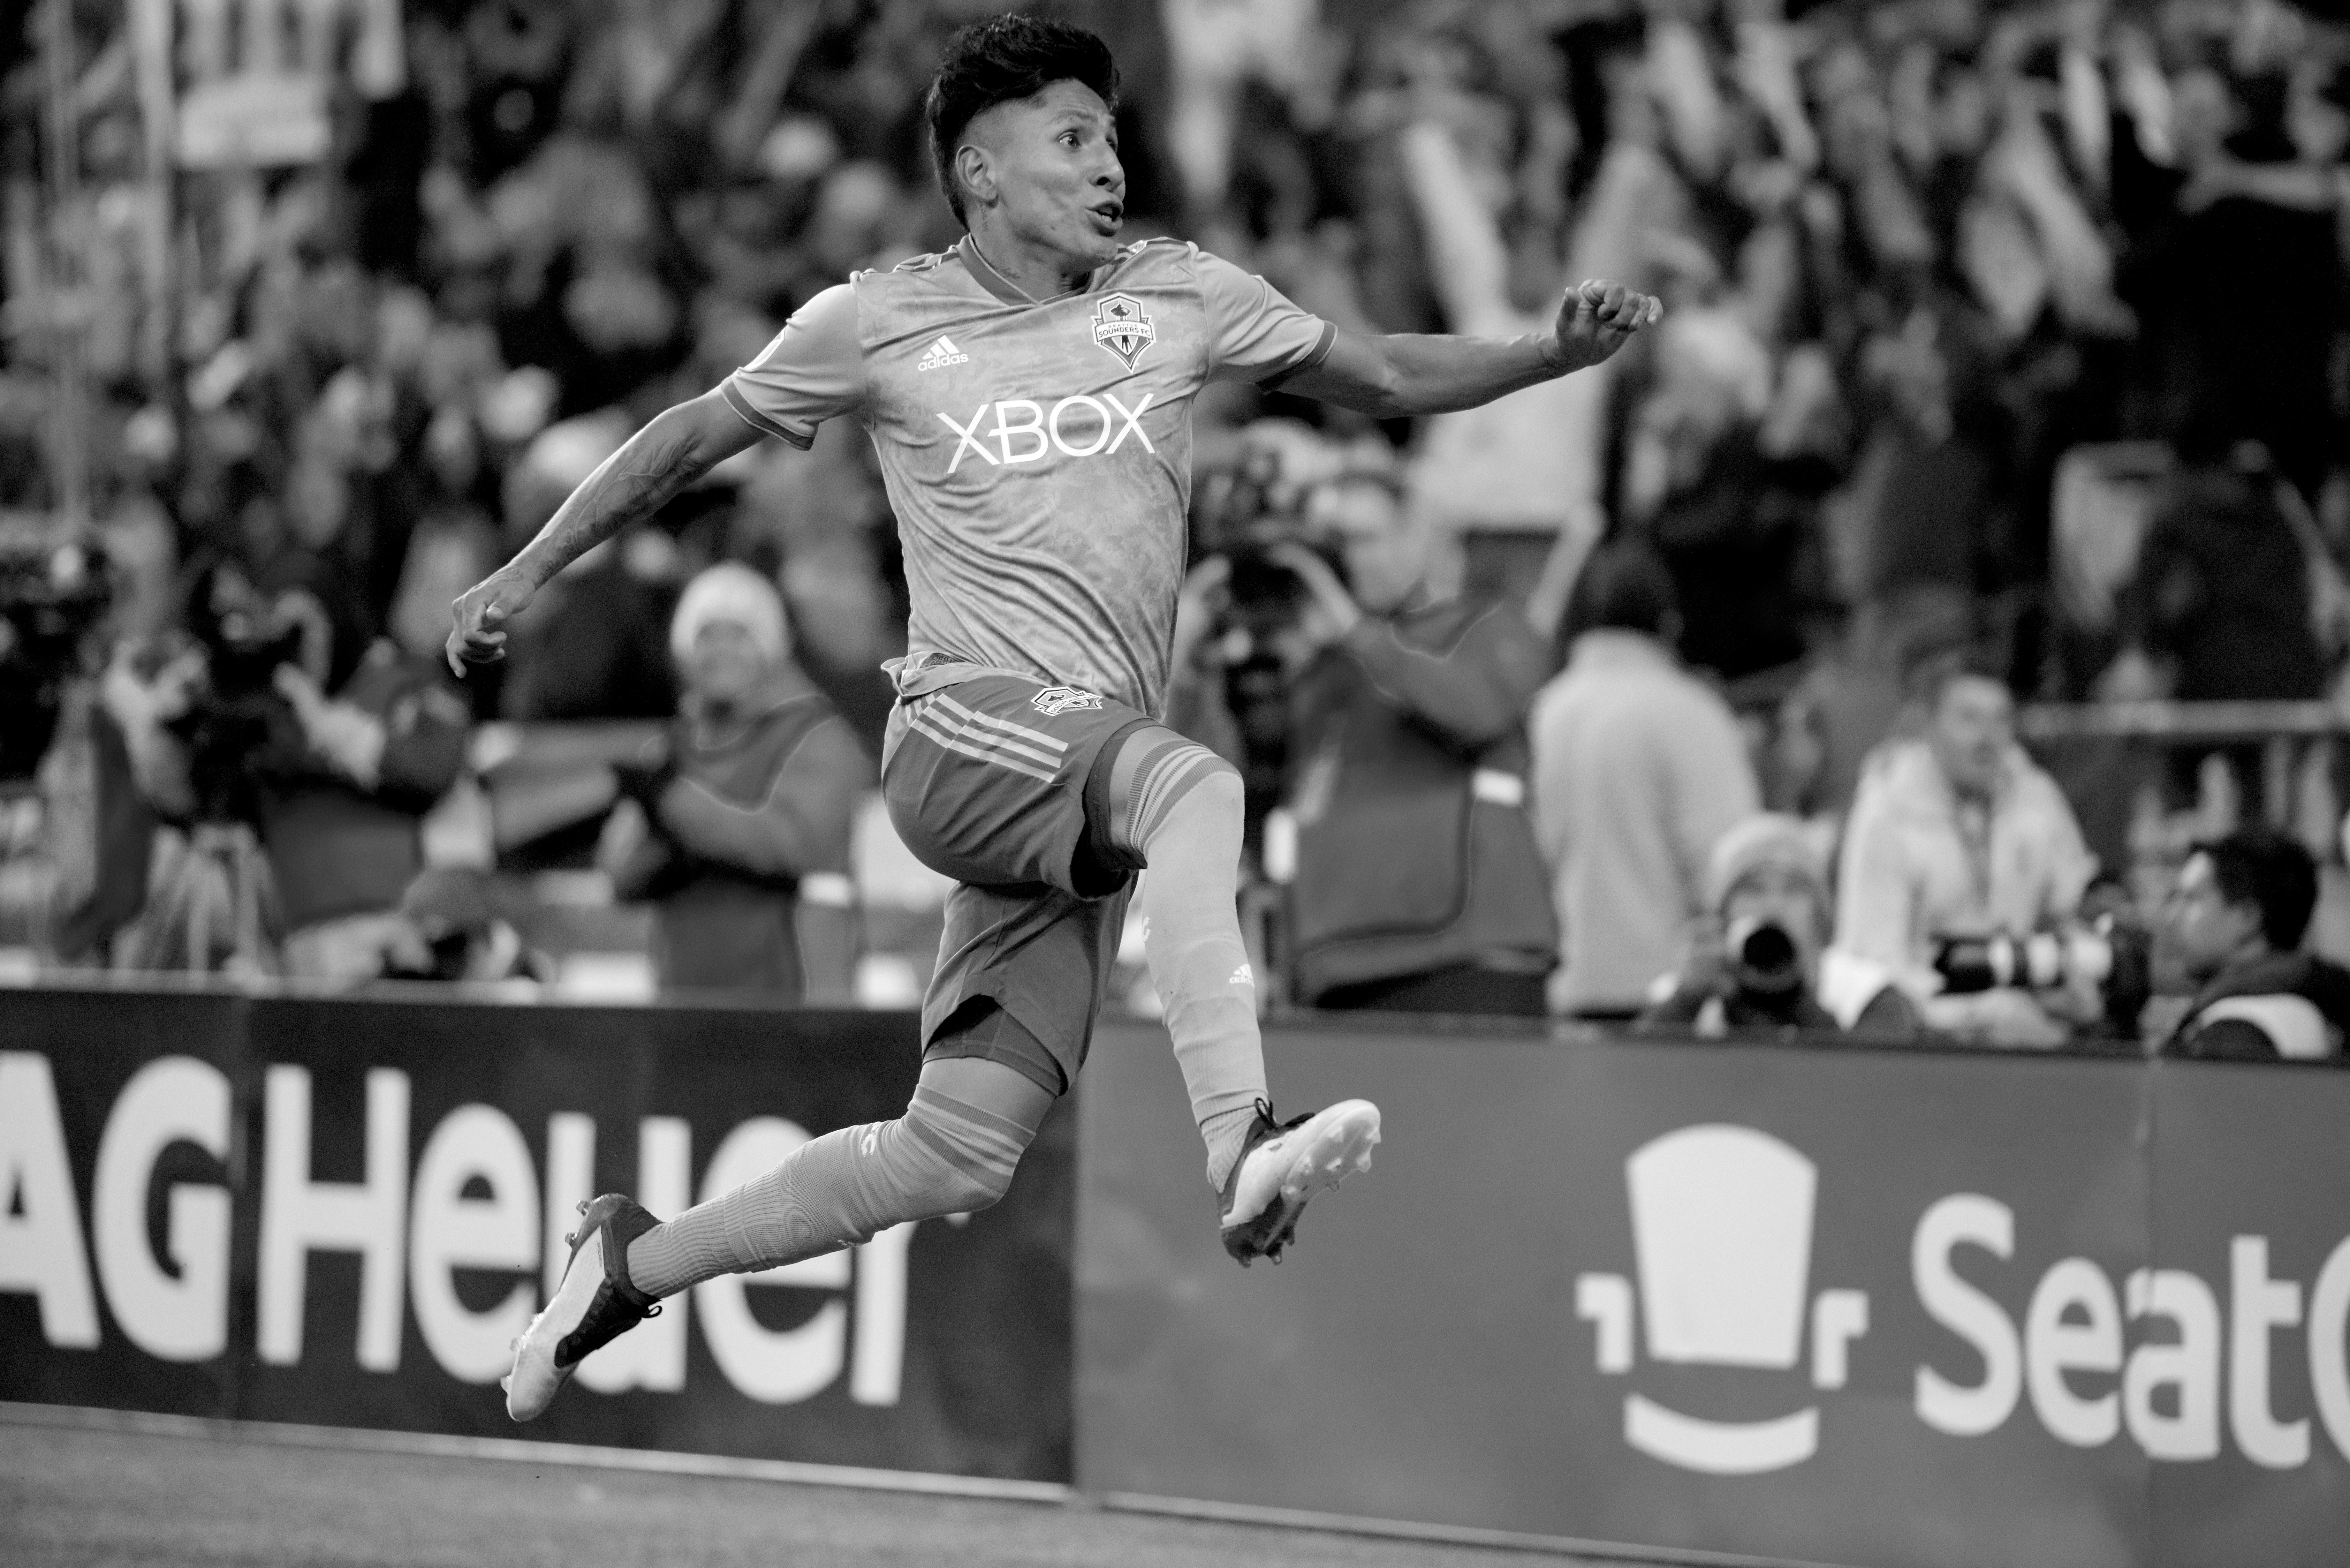 Seattle Sounders FC forward Raul Ruidiaz, a Peru National Team Member, scores against the Portland Timbers during the Western Conference Semifinals. Game was held at CenturyLink Field in Seattle, WA., in front of a sold out crowd. The passion and emotion in his face is what makes this picture a must-have on your collection. Many play the game, not all get to live it.